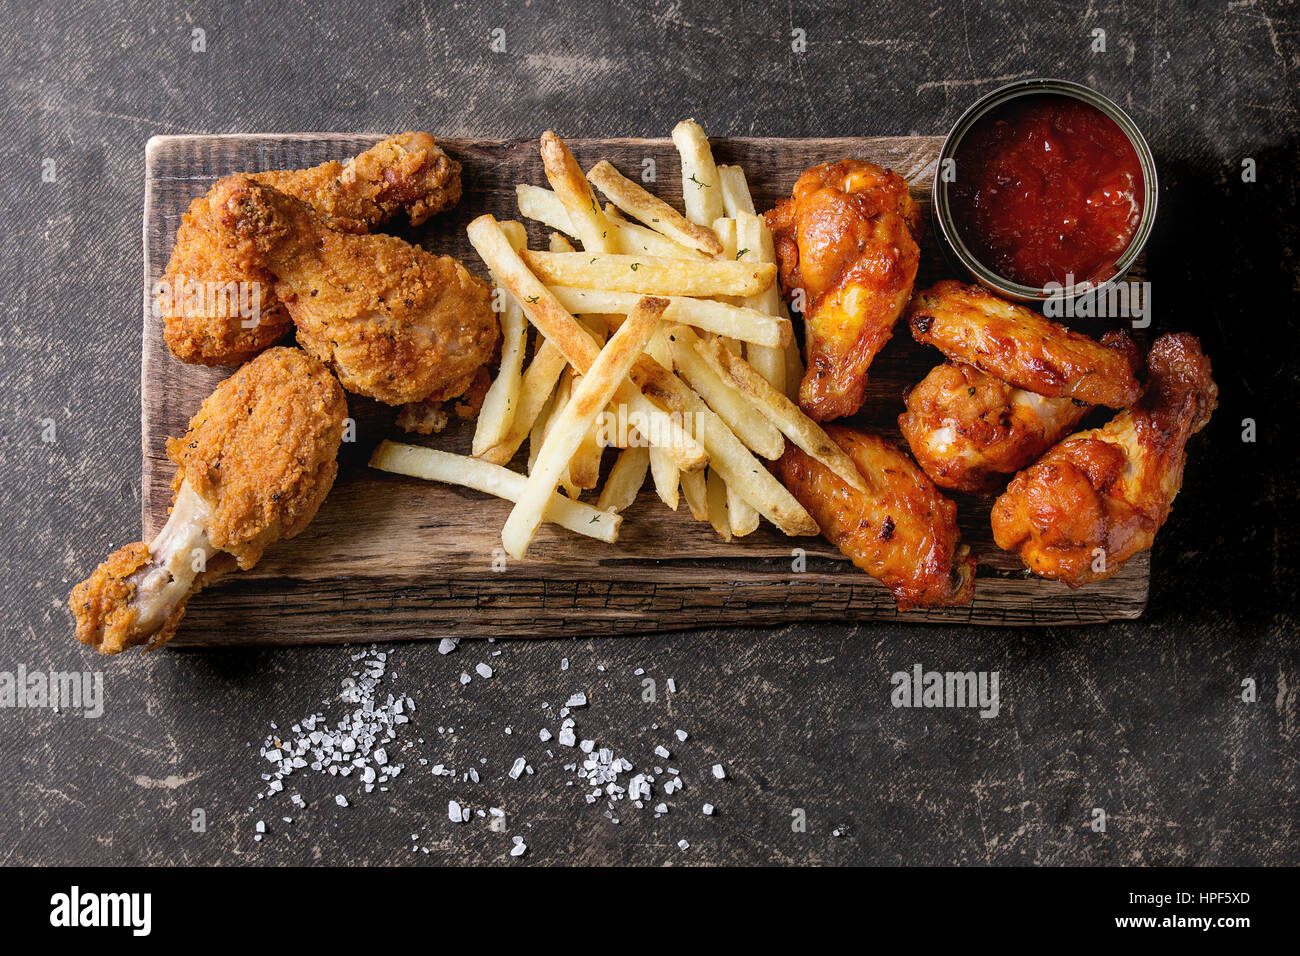 Fast food fried crispy and spicy chicken legs, wings and french fries potatoes with salt and ketchup sauce served on wooden serving board over dark te Stock Photo